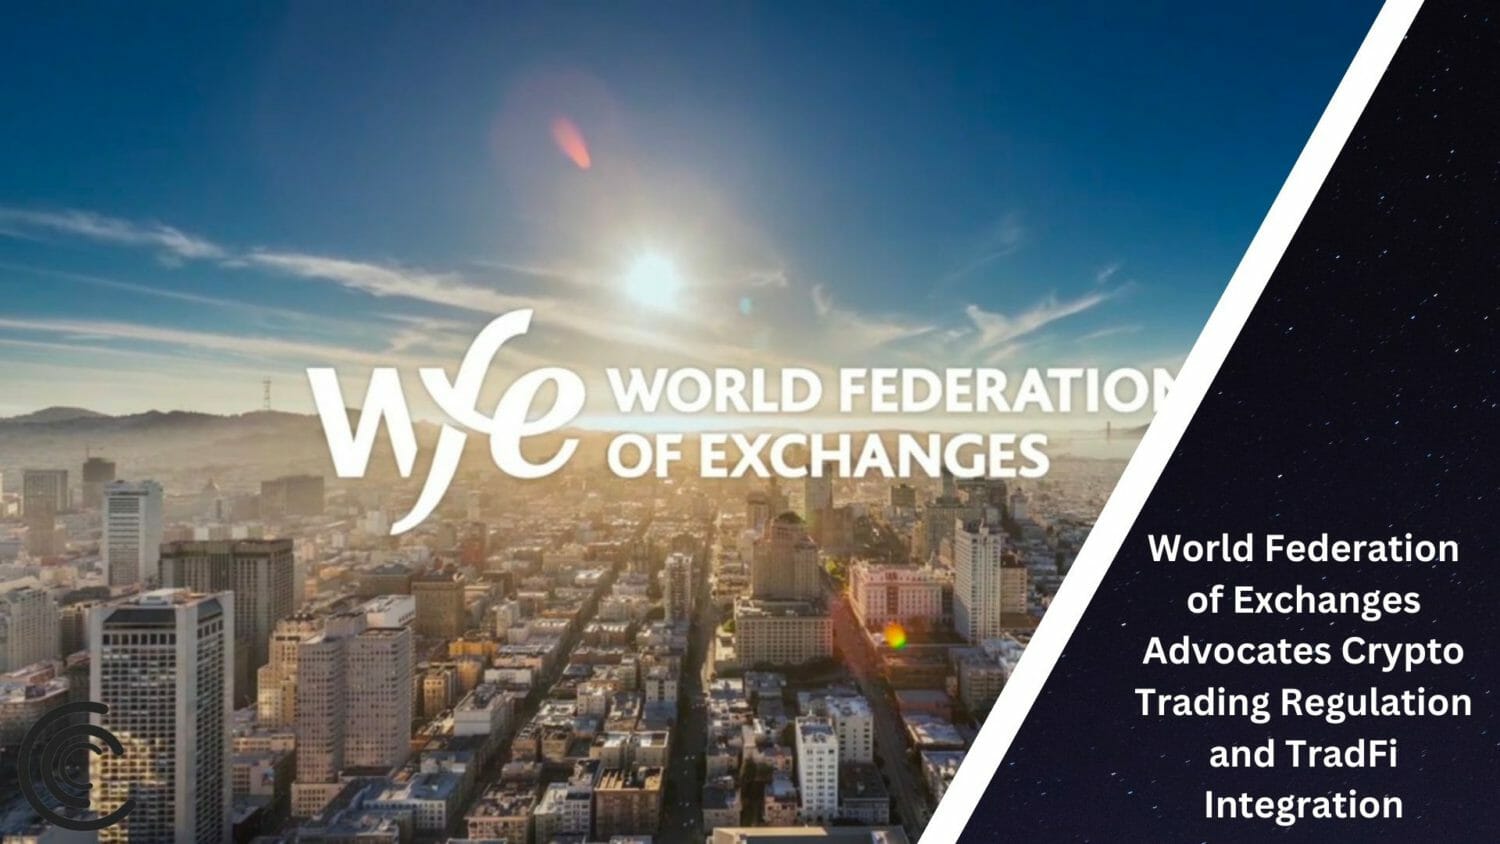 World Federation Of Exchanges Advocates Crypto Trading Regulation And Tradfi Integration